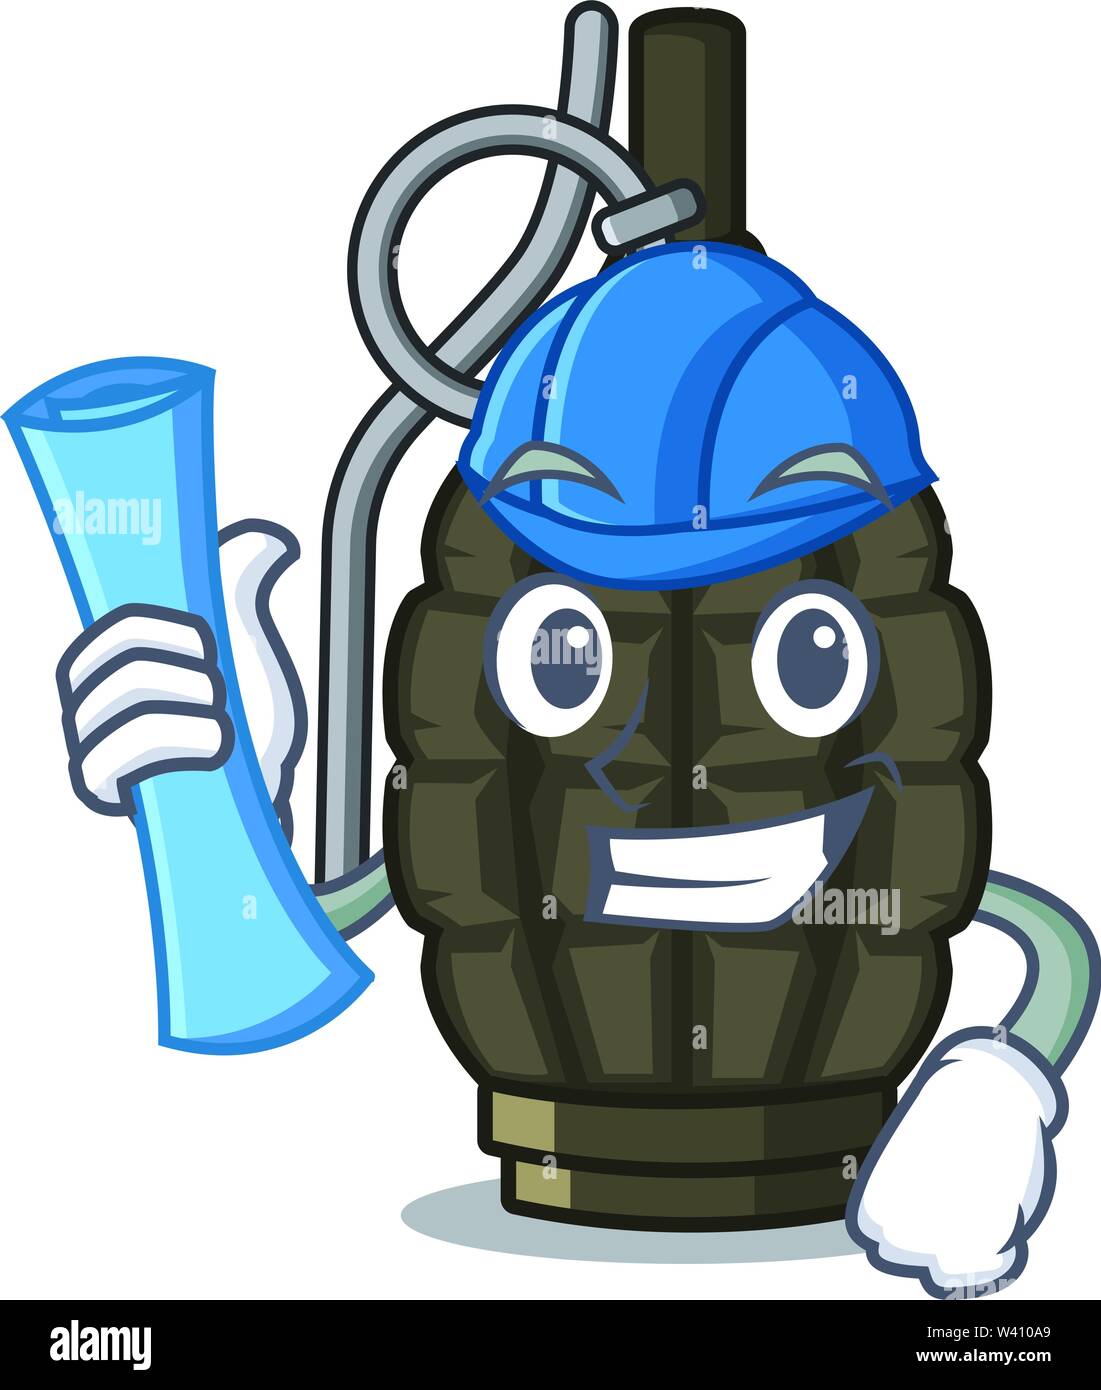 Architect grenade in the a mascot shape vector illustration Stock Vector